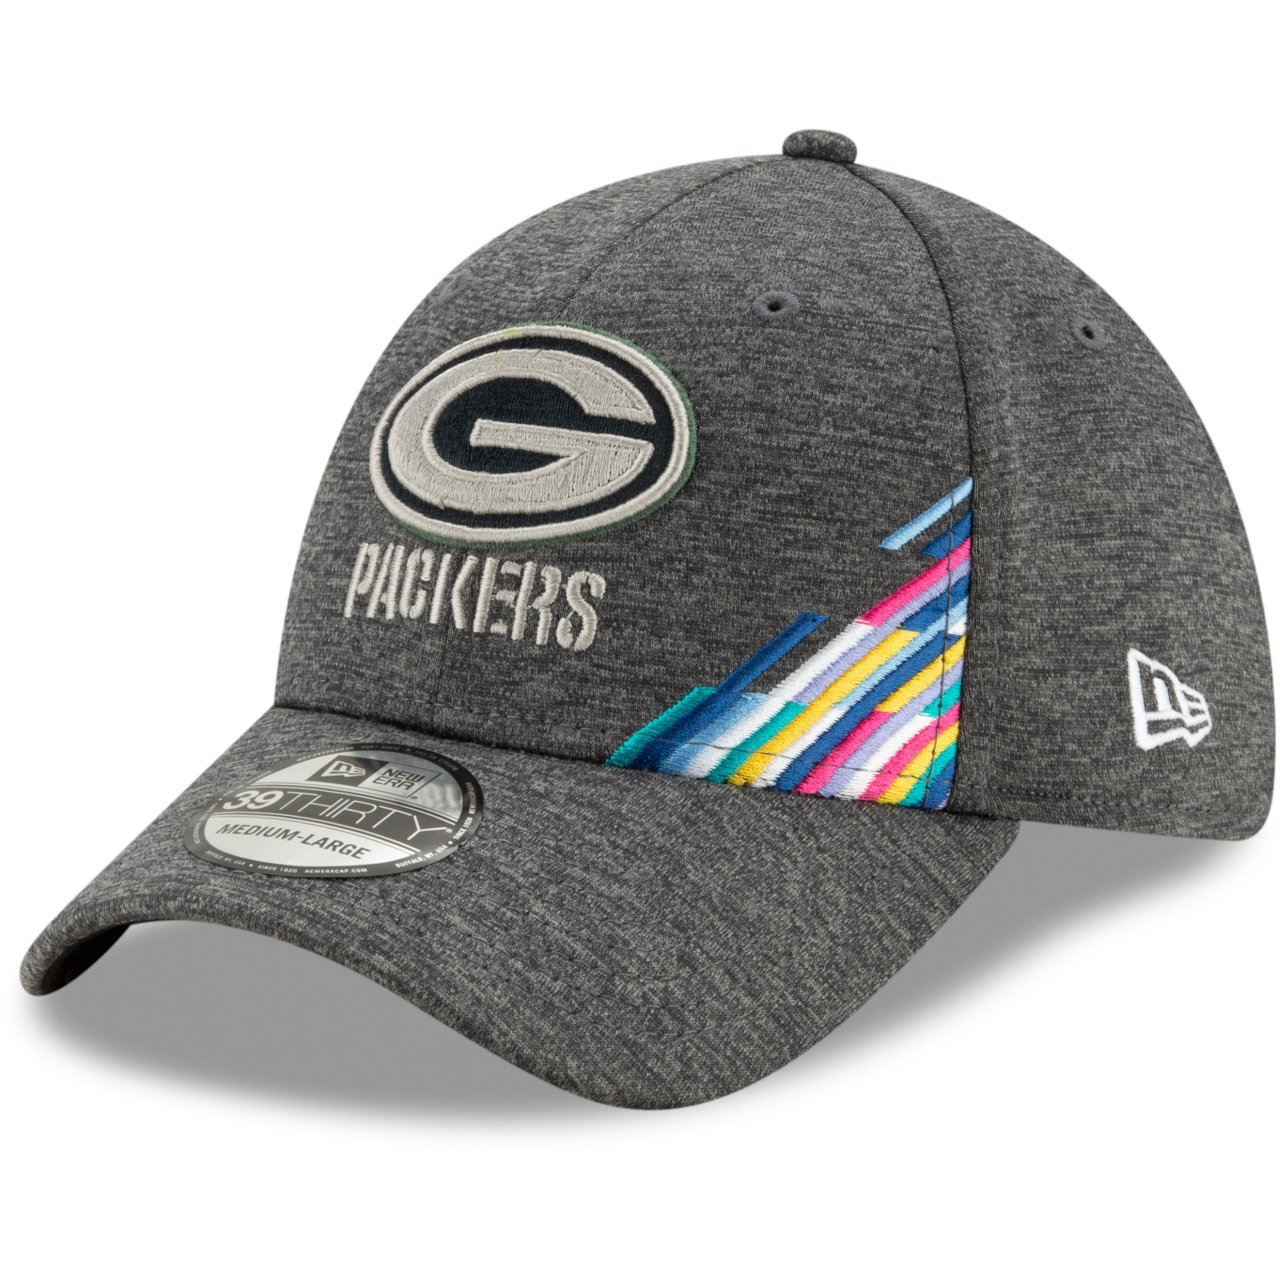 New Era 39Thirty Cap - CRUCIAL CATCH Green Bay Packers | Stretch-Fit ...